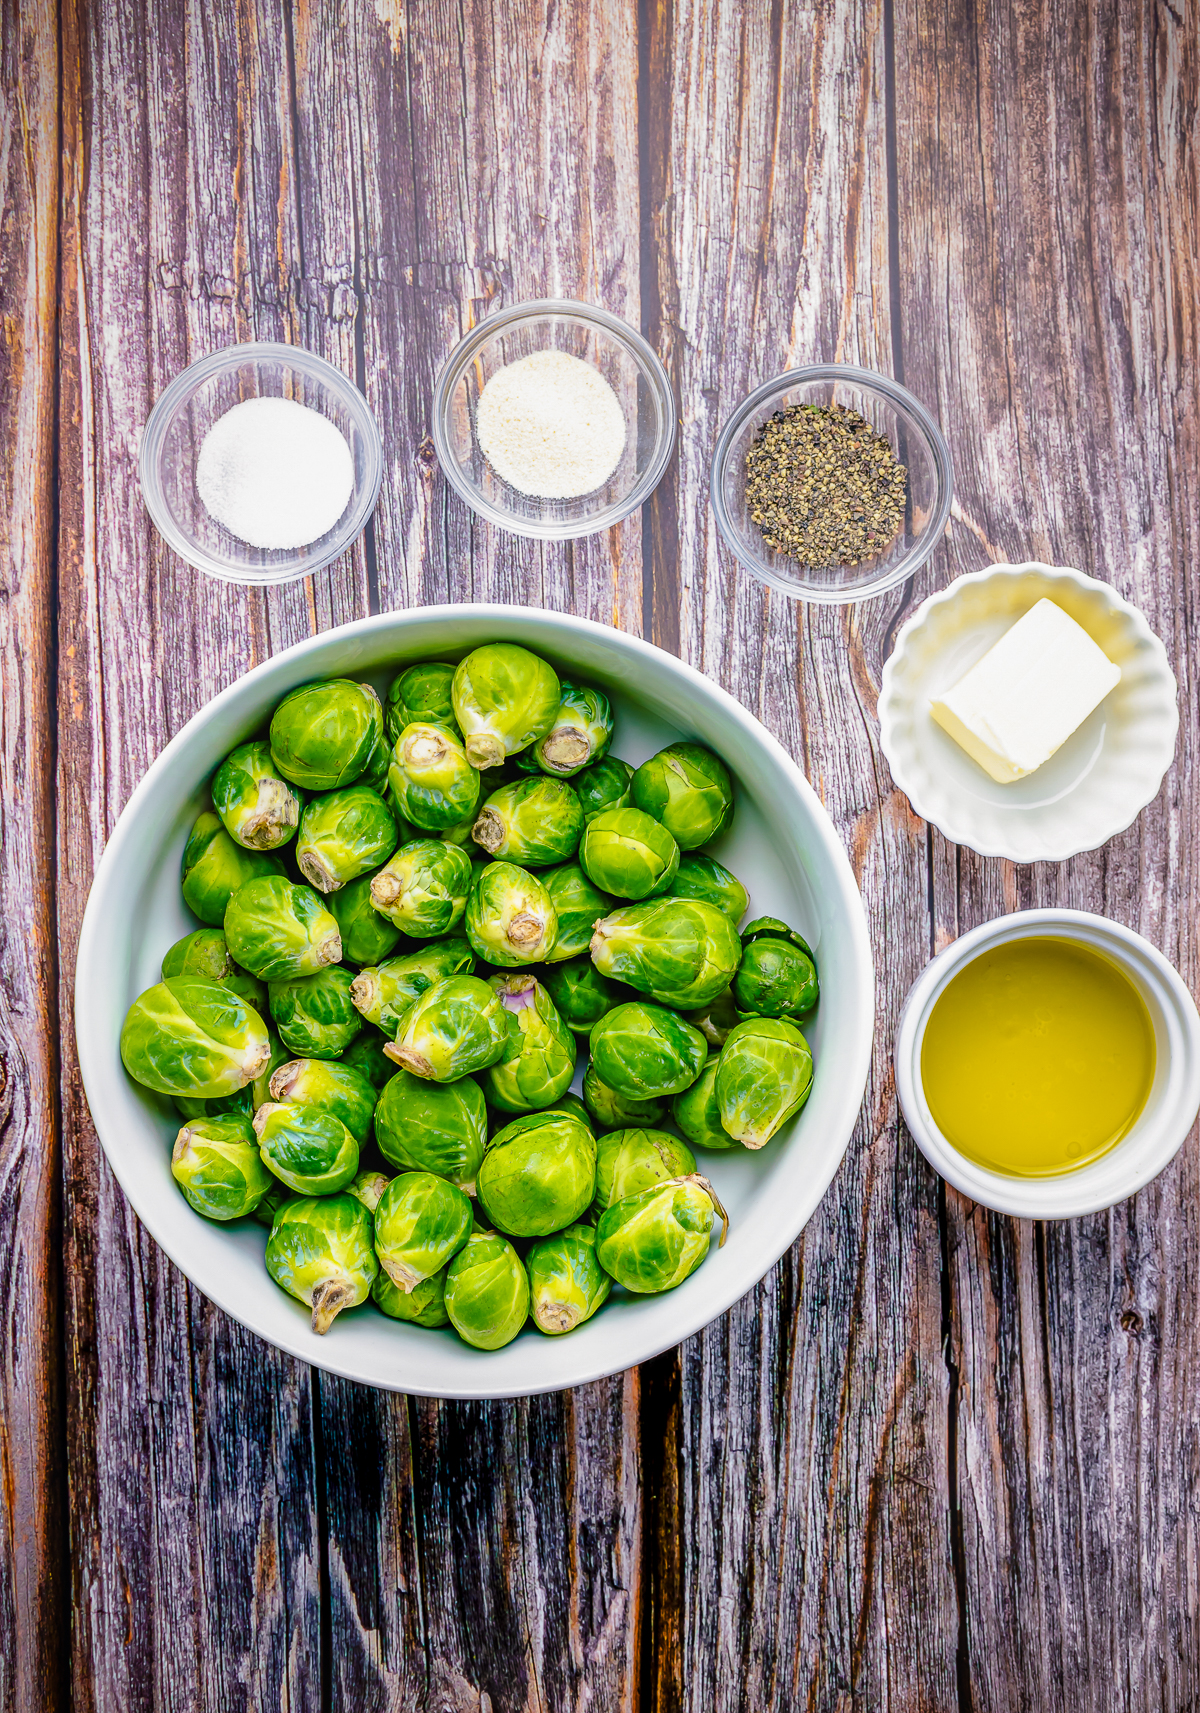 Ingredients needed to make Oven Roasted Brussel Sprouts.